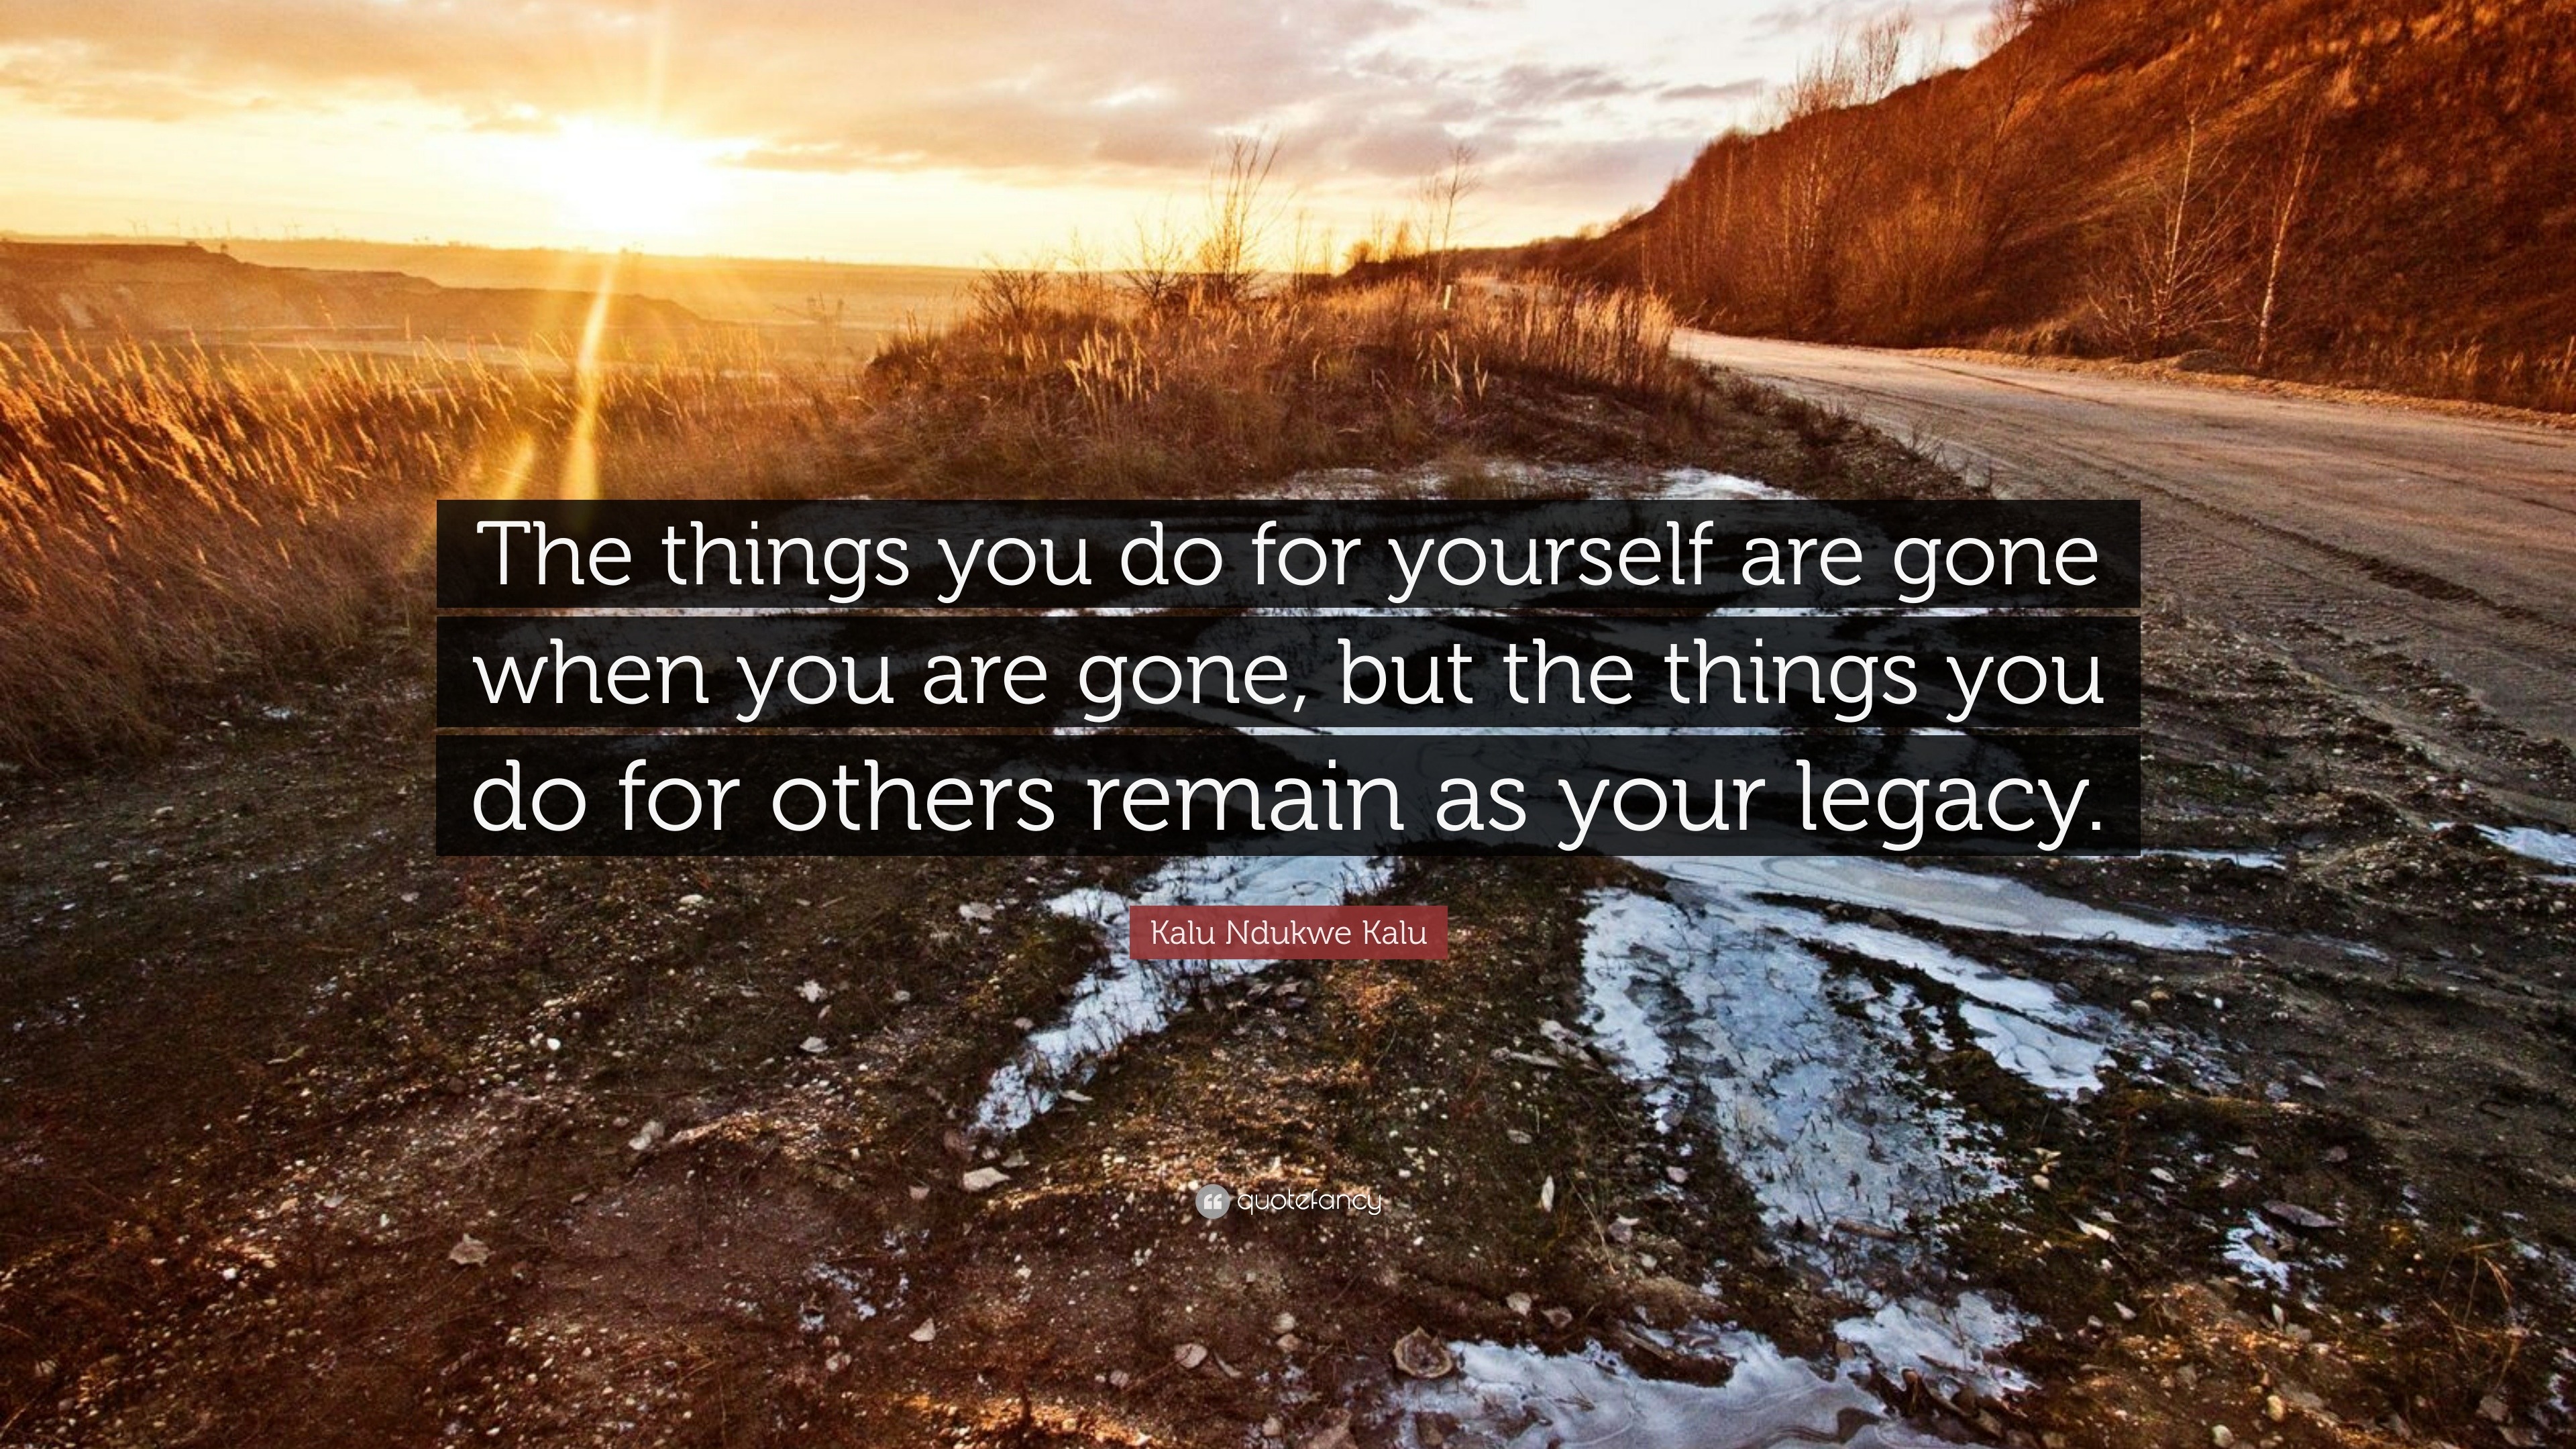 Kalu Ndukwe Kalu Quote: “The things you do for yourself are gone when ...